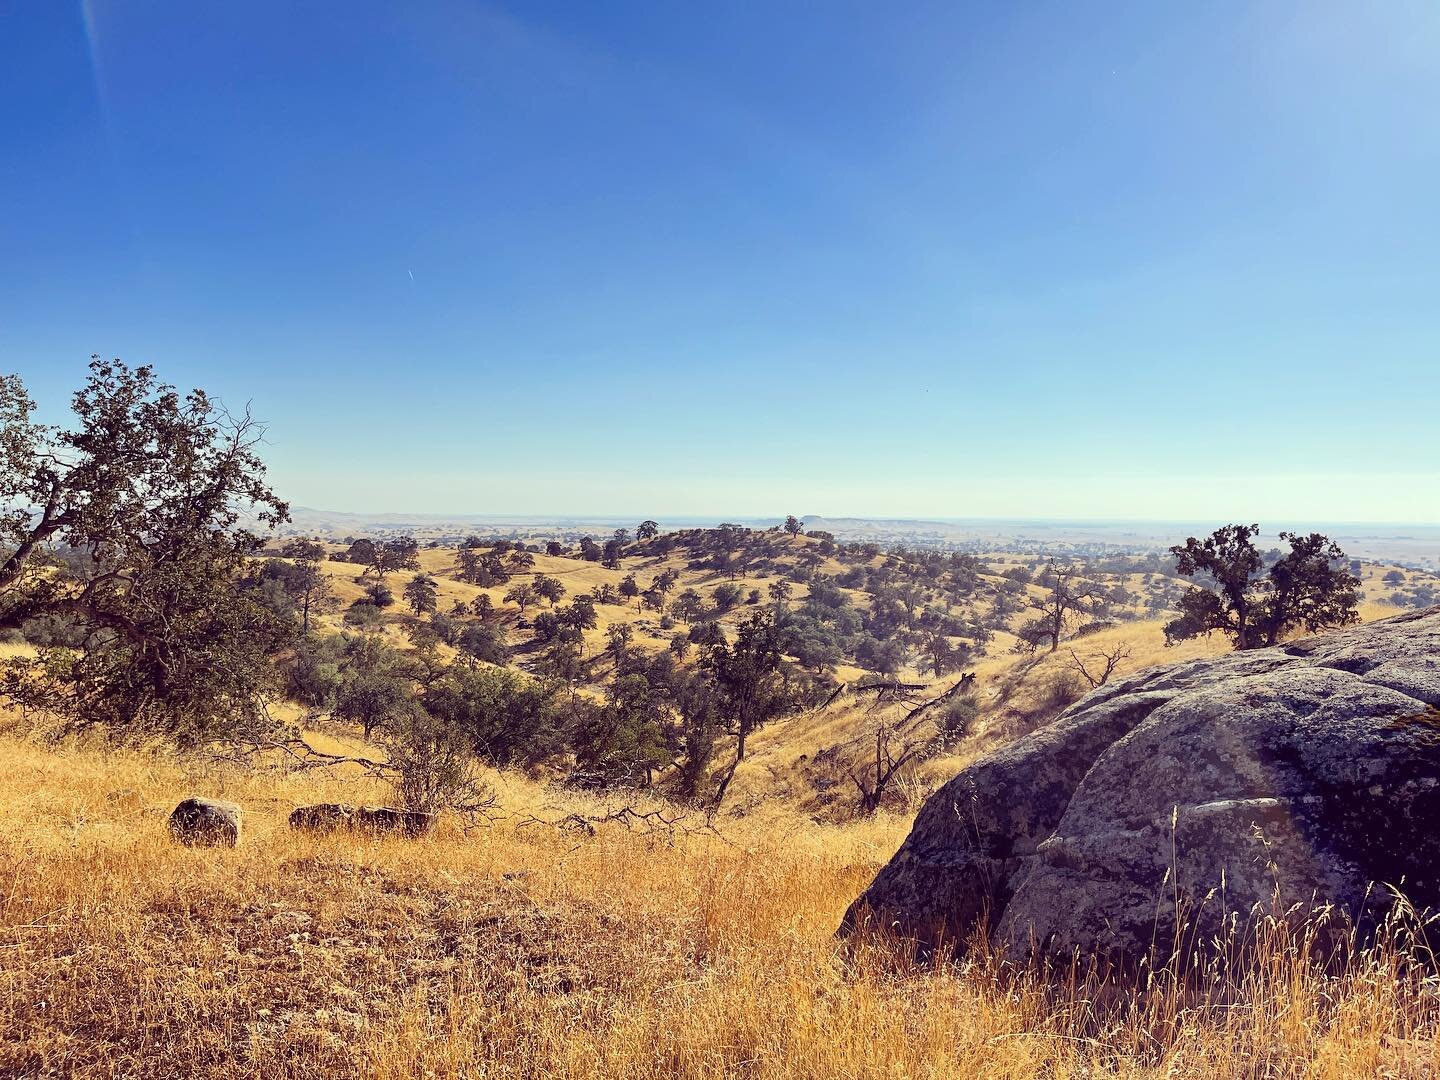 Views for days! New project site visit in Coarsegold

#brockitecture #ryanbrockettarchitect #architect #architecture #arch #design #interiors #residential #commercial #centralcoast #slocounty #templeton